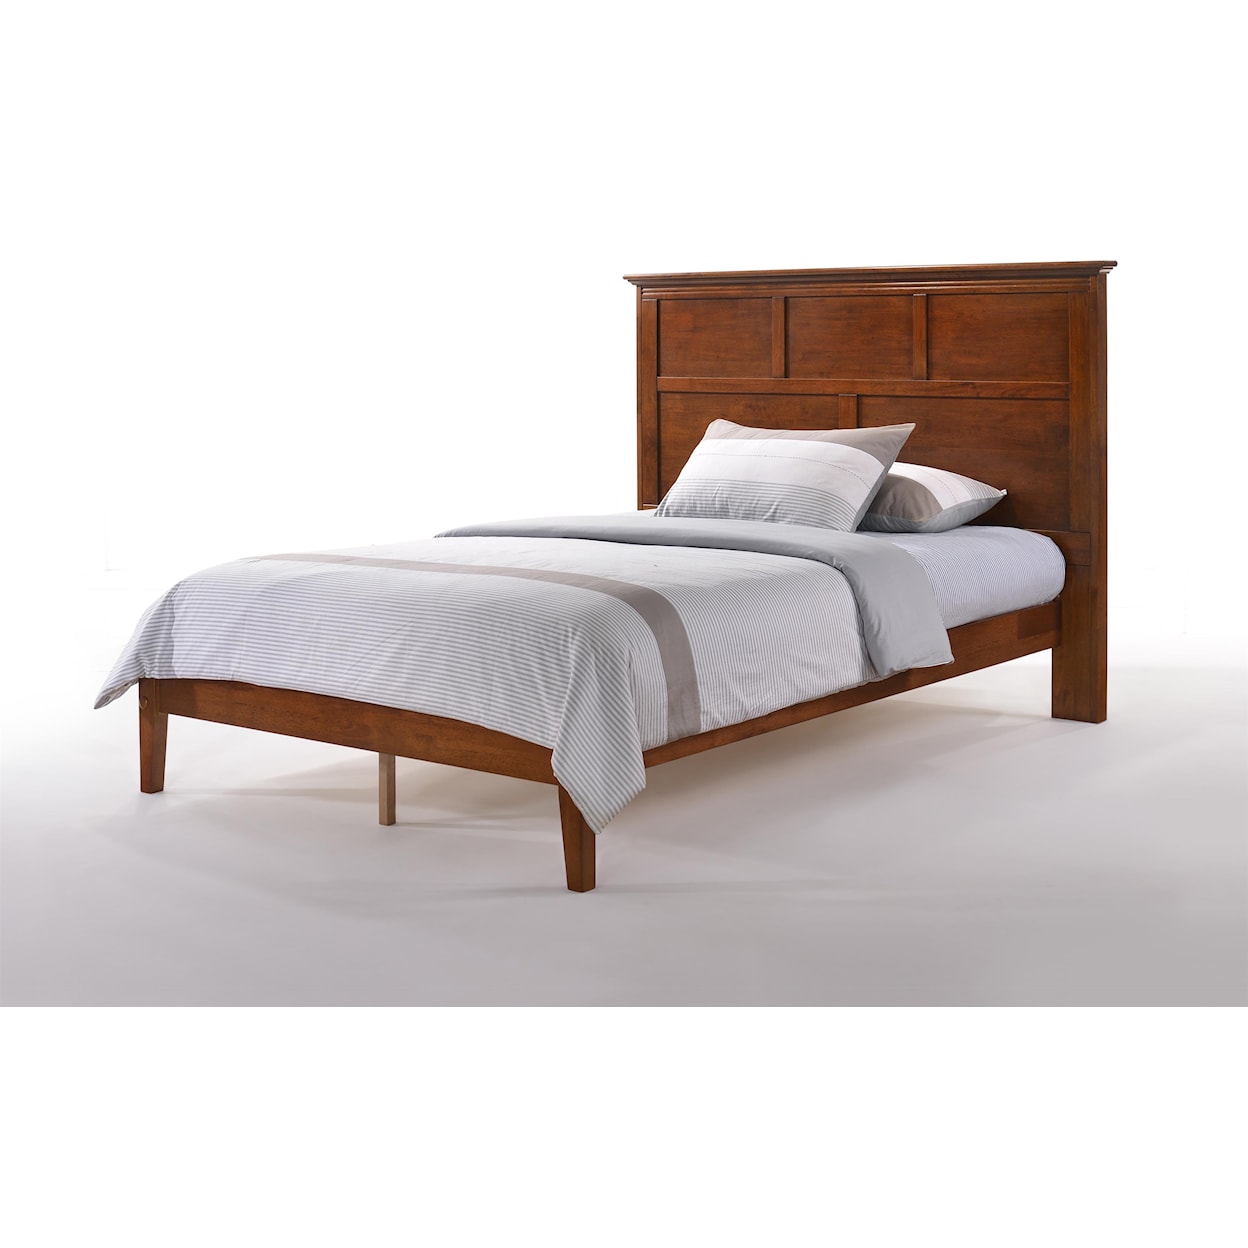 Night & Day Furniture Spice Tarragon Cherry Queen Bed